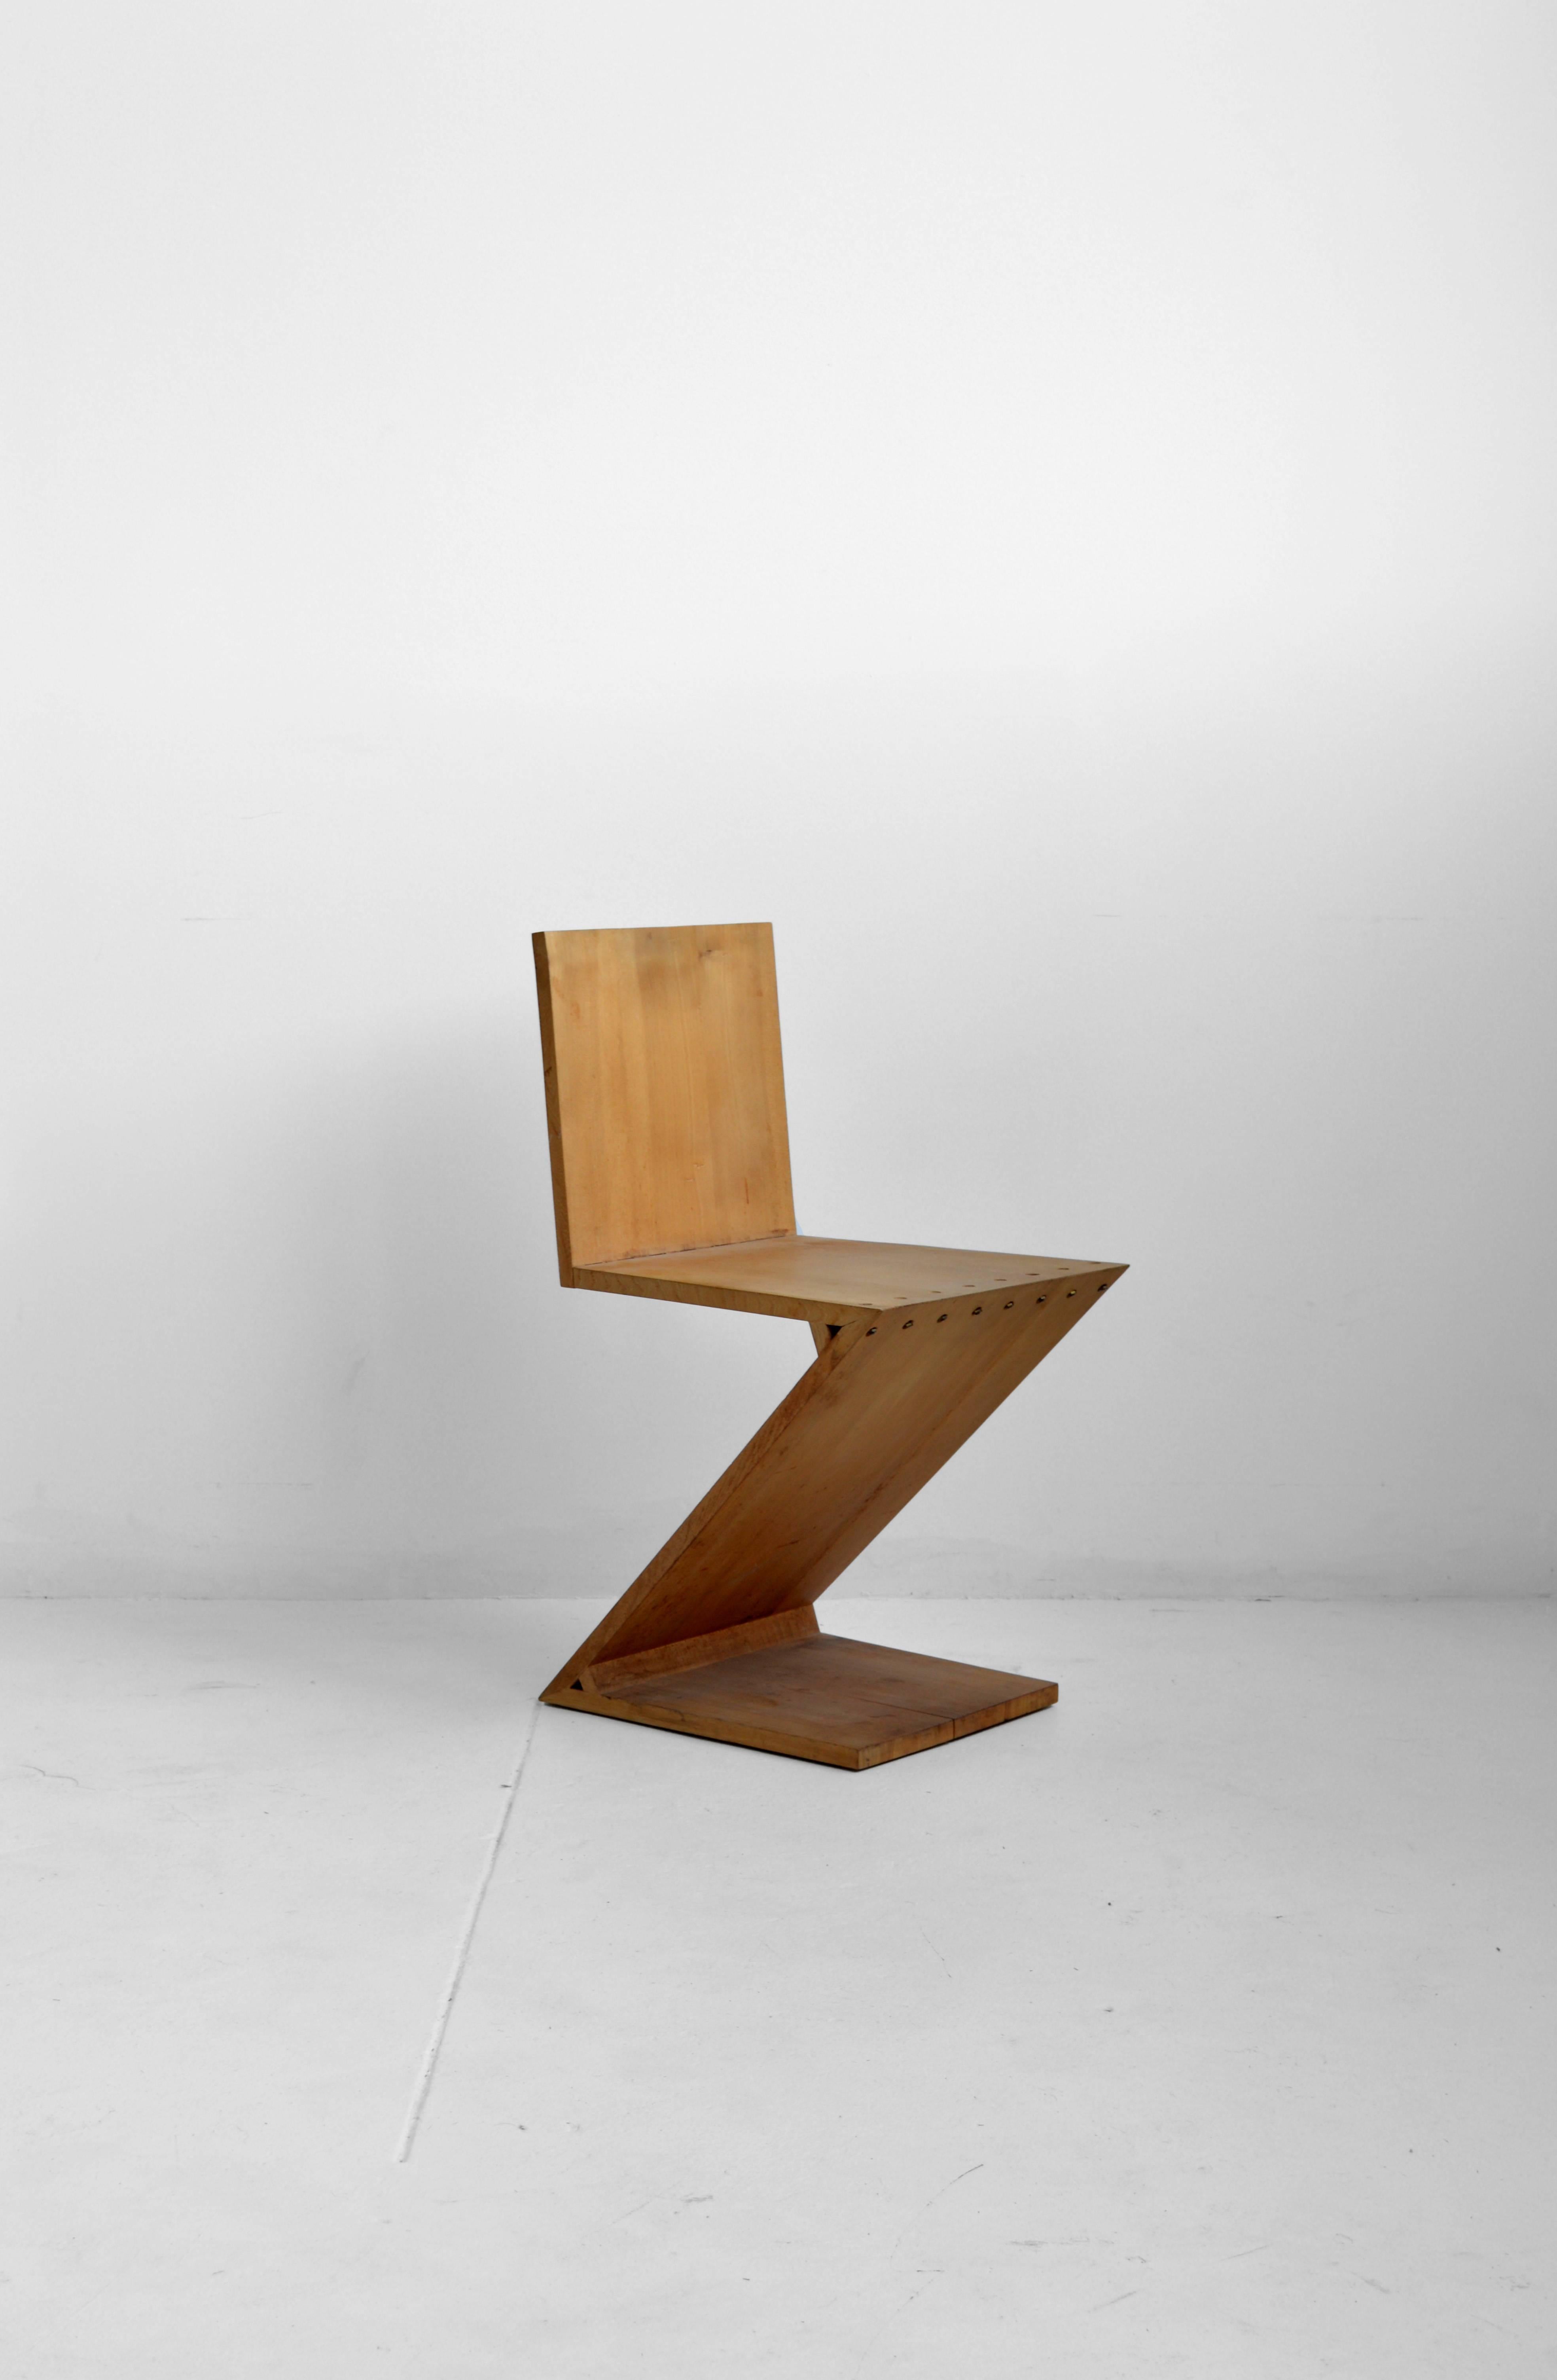 Iconic riveted Zig-Zag chair by Dutch furniture designer and architect Gerrit Thomas Rietveld and produced by Gerard van de Groenekan. Striking Silhouette of solid elm with brass rivets. Signed with branded manufacturer's mark to underside.